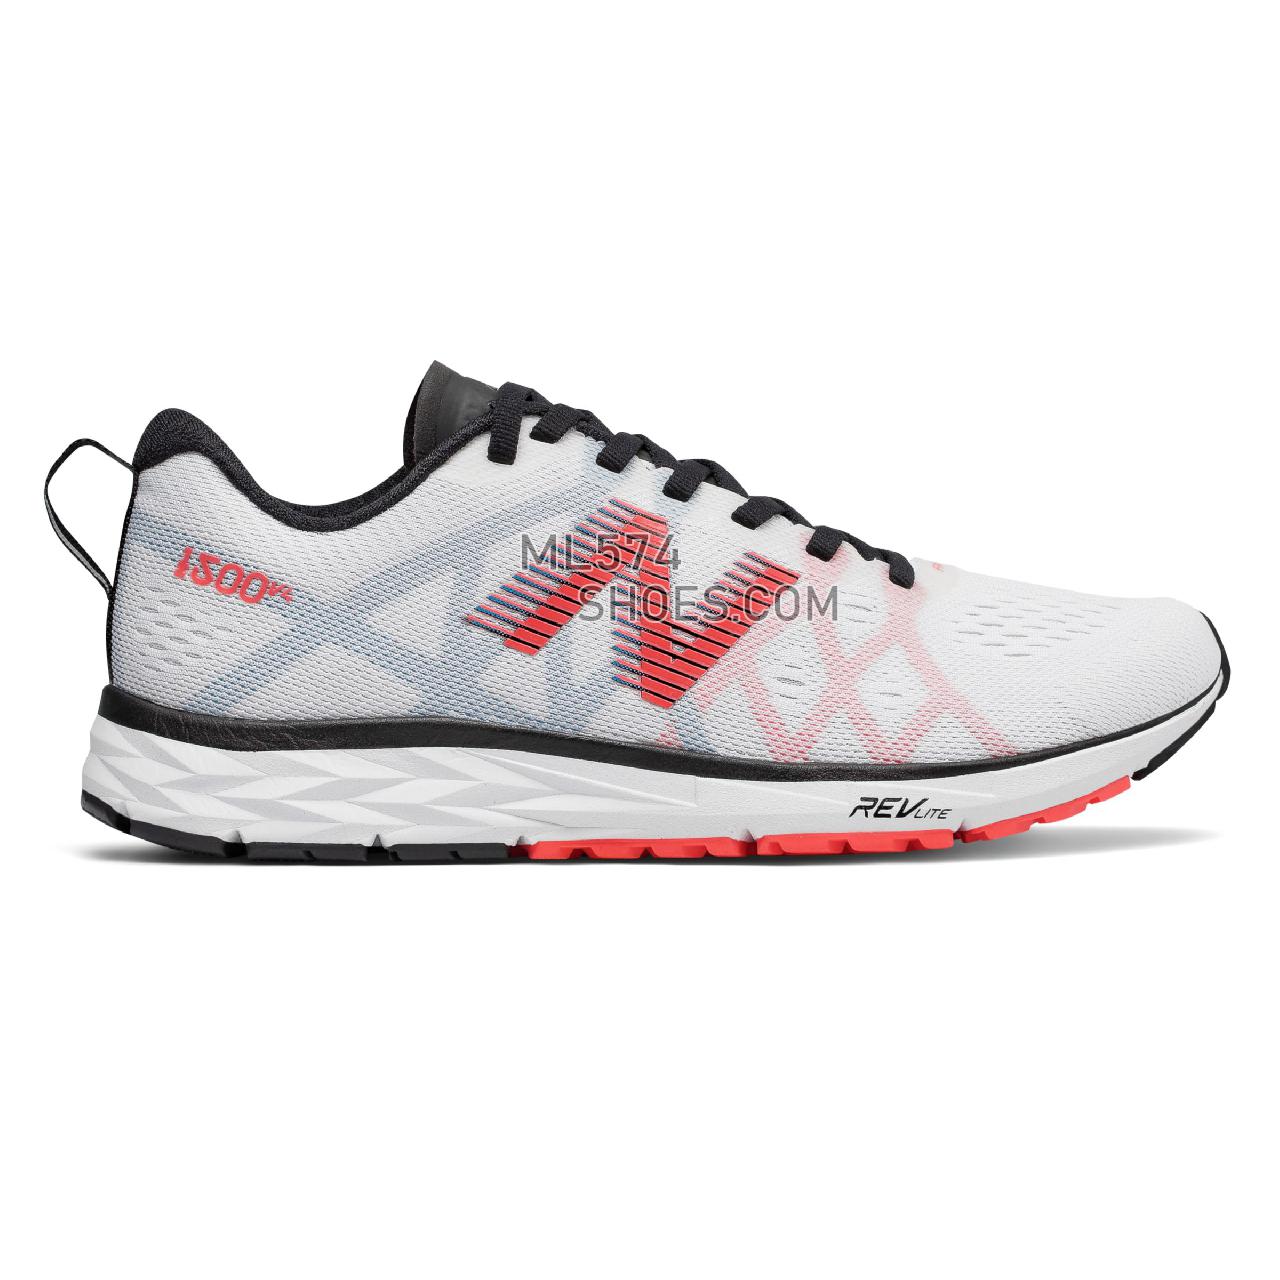 New Balance 1500v4 - Women's 1500 - Running White with Red and Black - W1500WR4